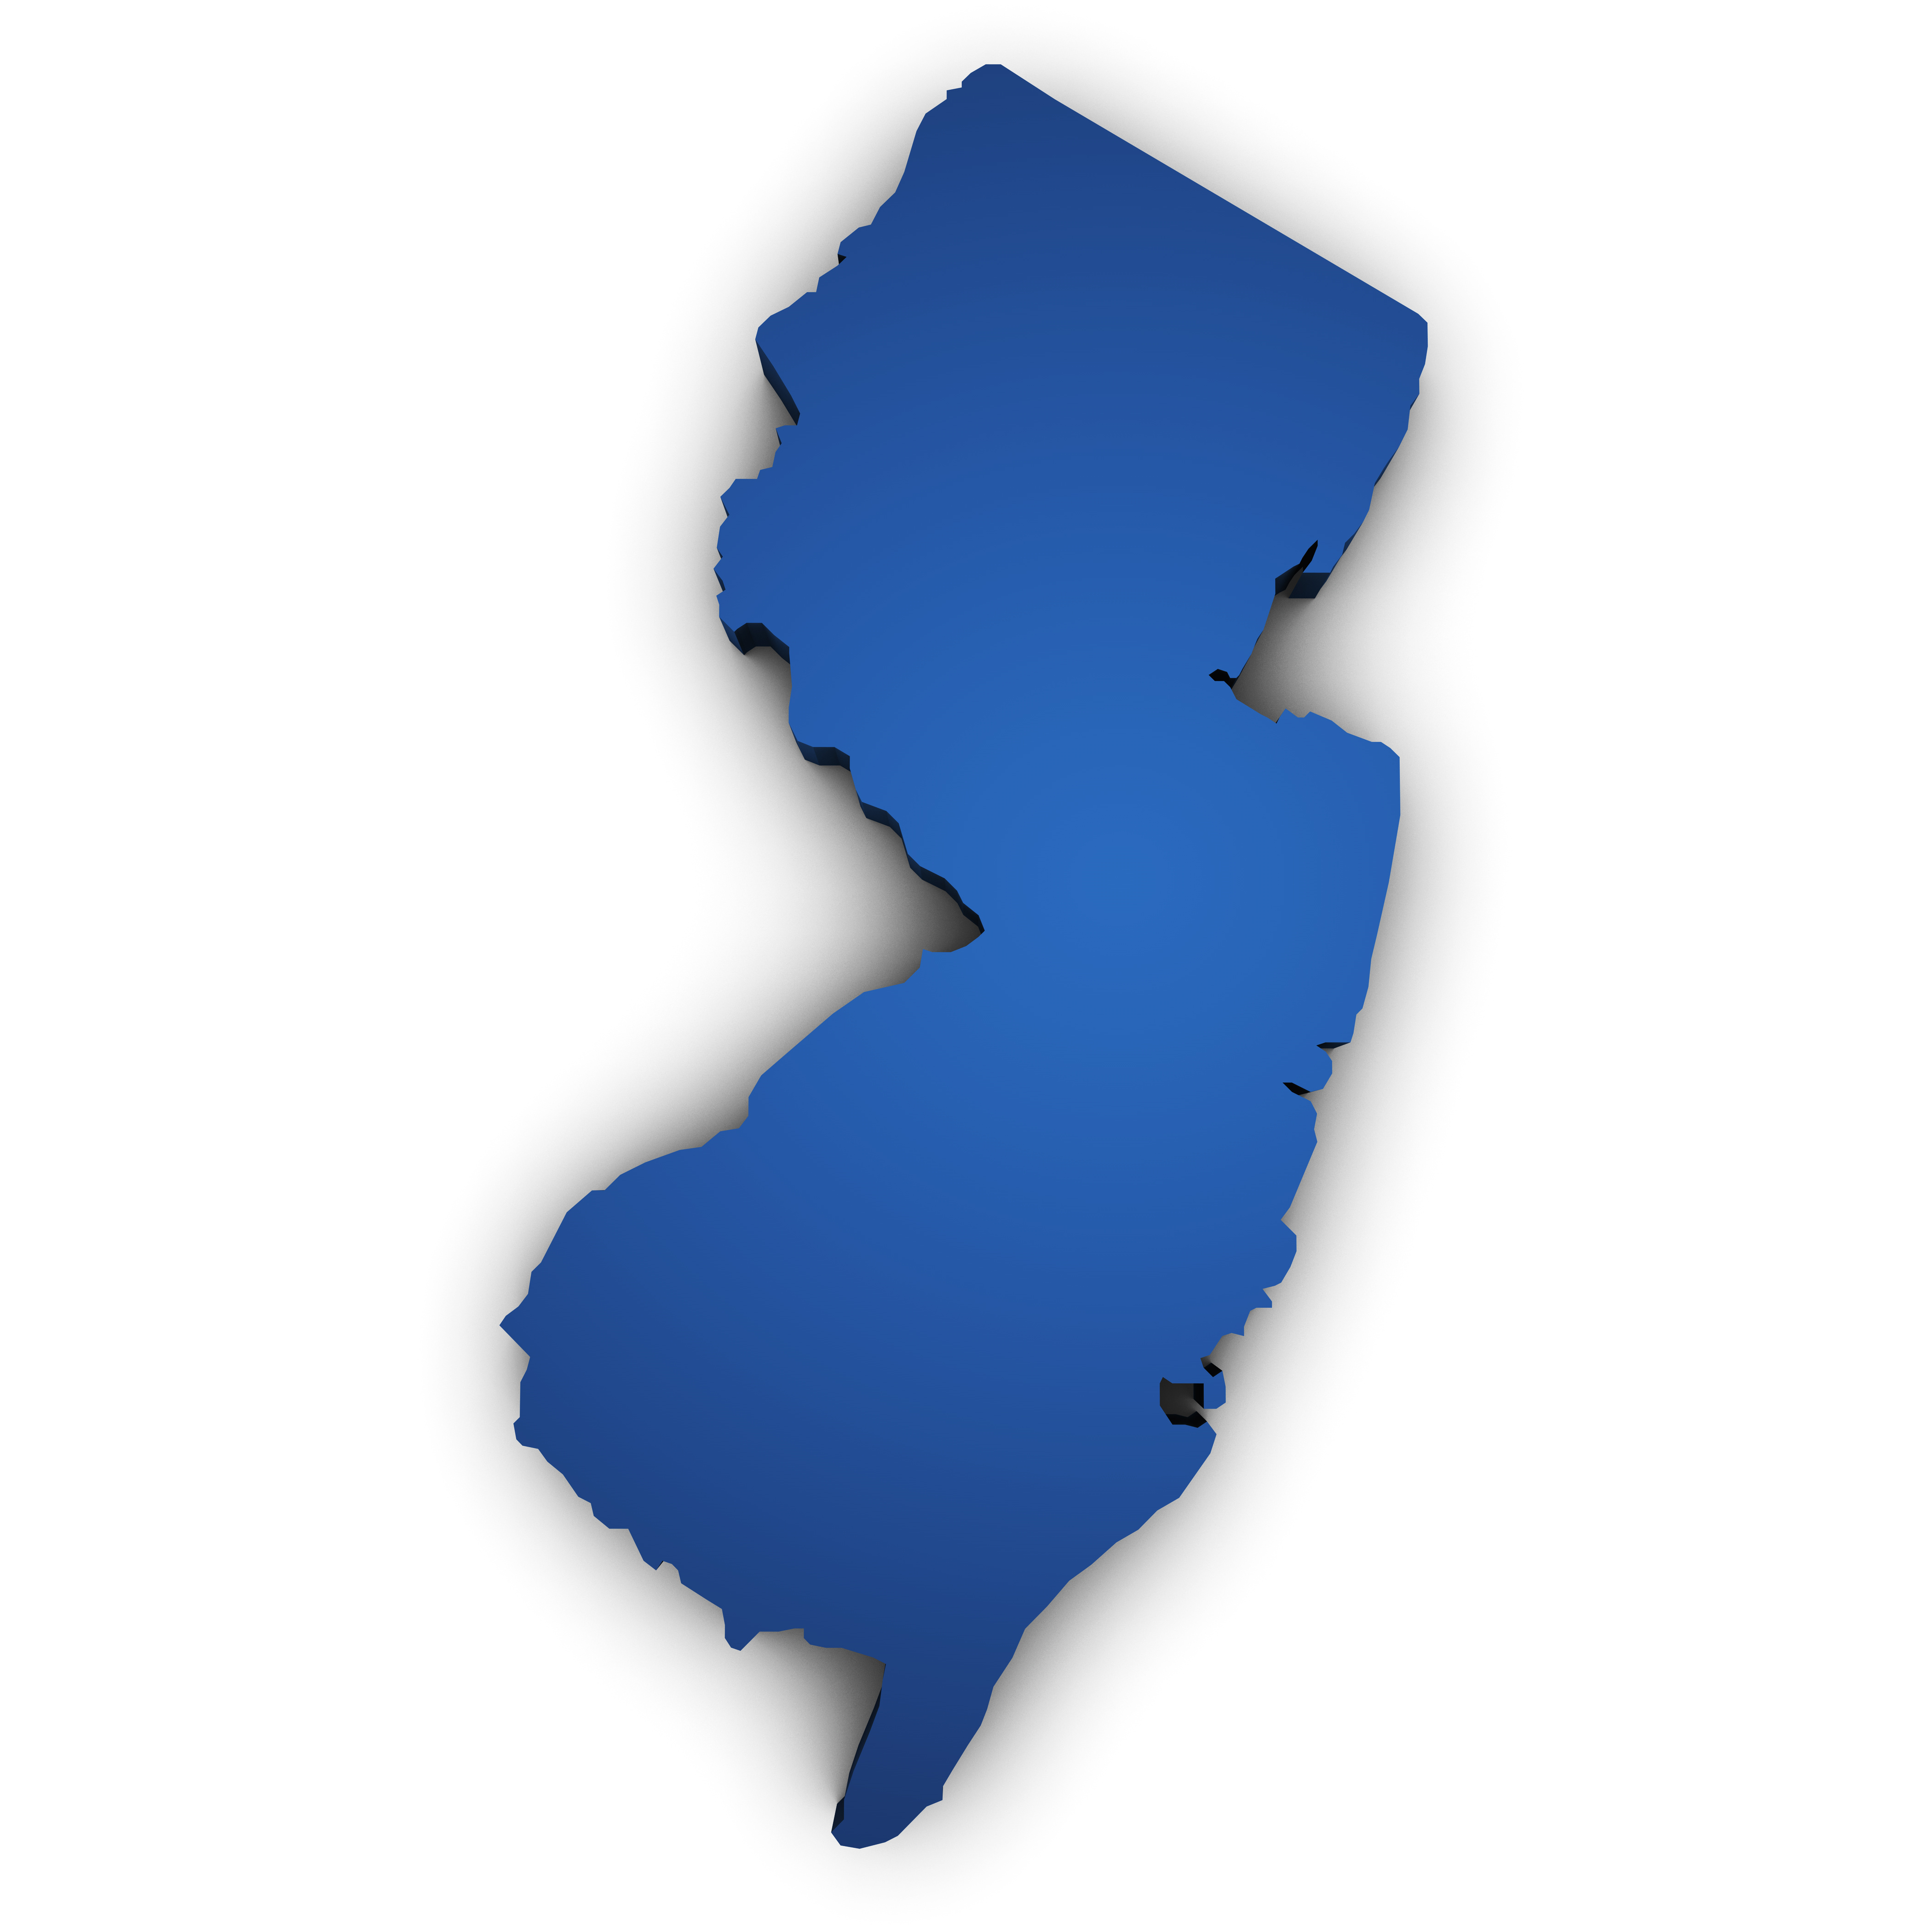 clip art of new jersey - photo #9